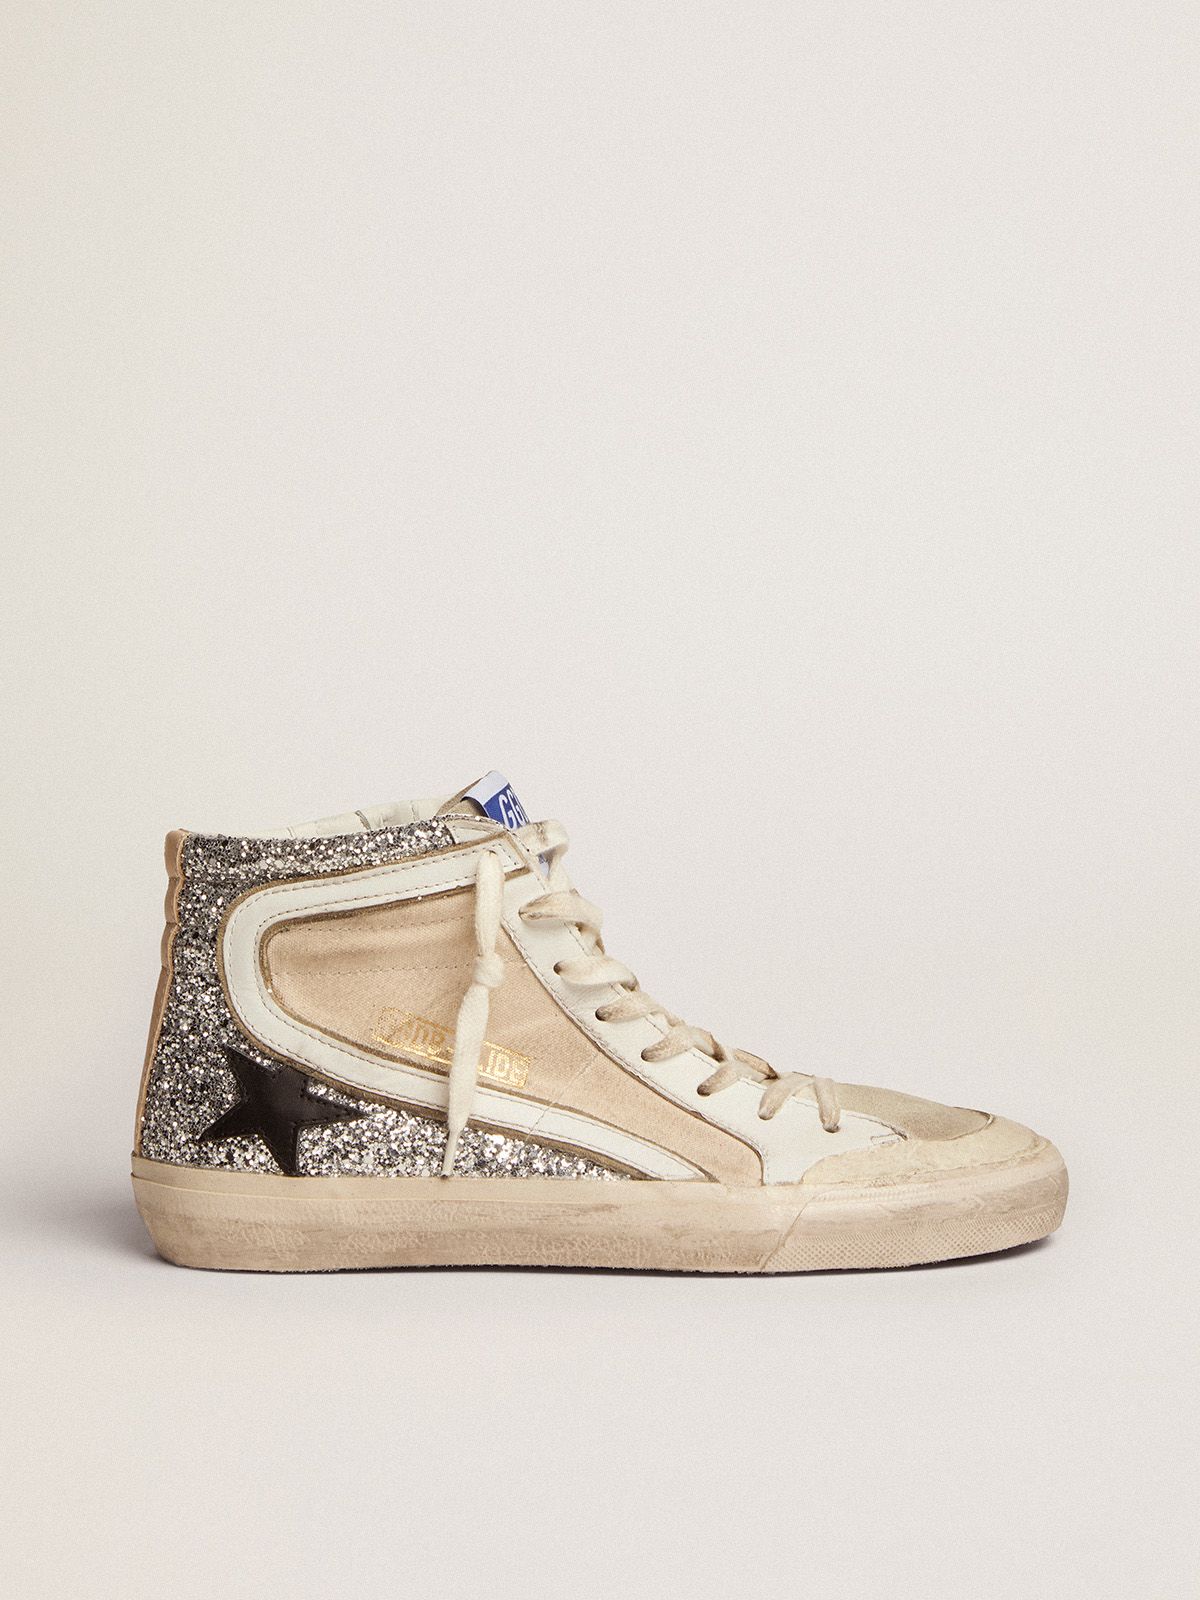 golden goose Slide with and glitter in black canvas Penstar star silver sneakers leather cream-colored